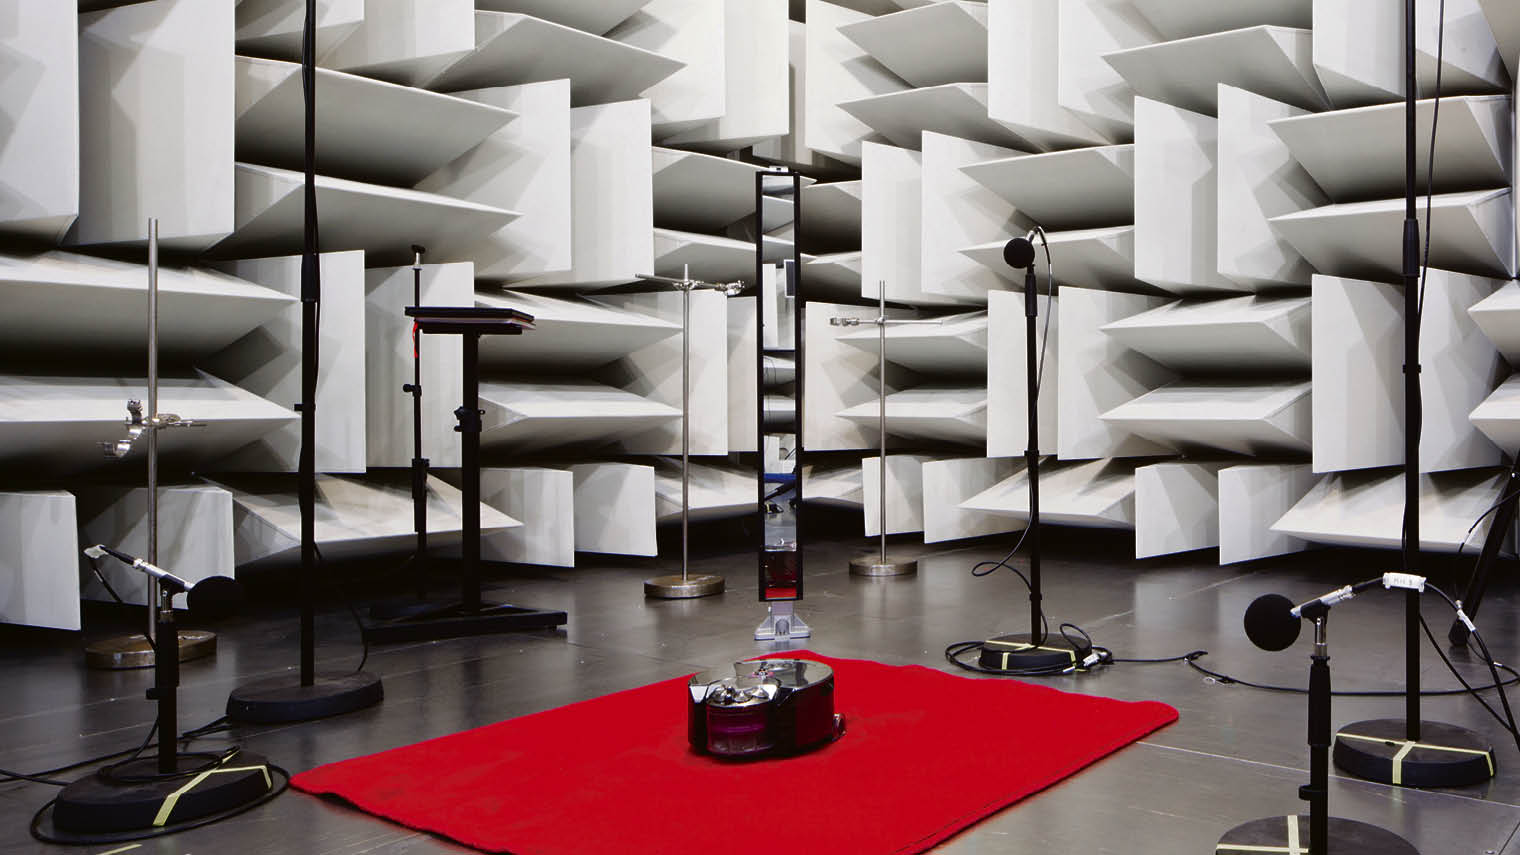 Testing the Dyson 360 Eye in the anechoic chamber